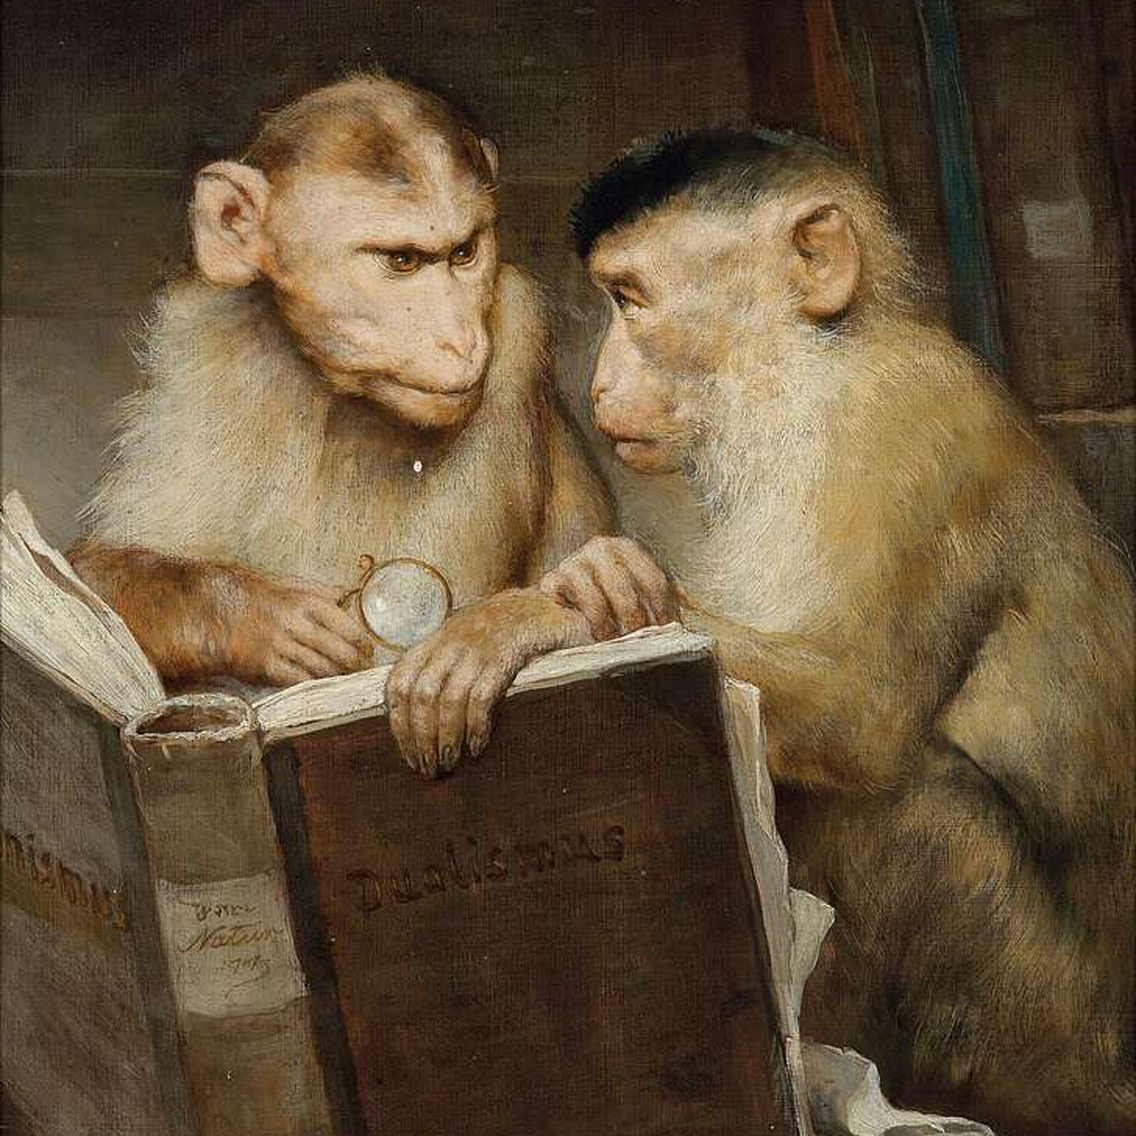 Painting of monkeys holding a book